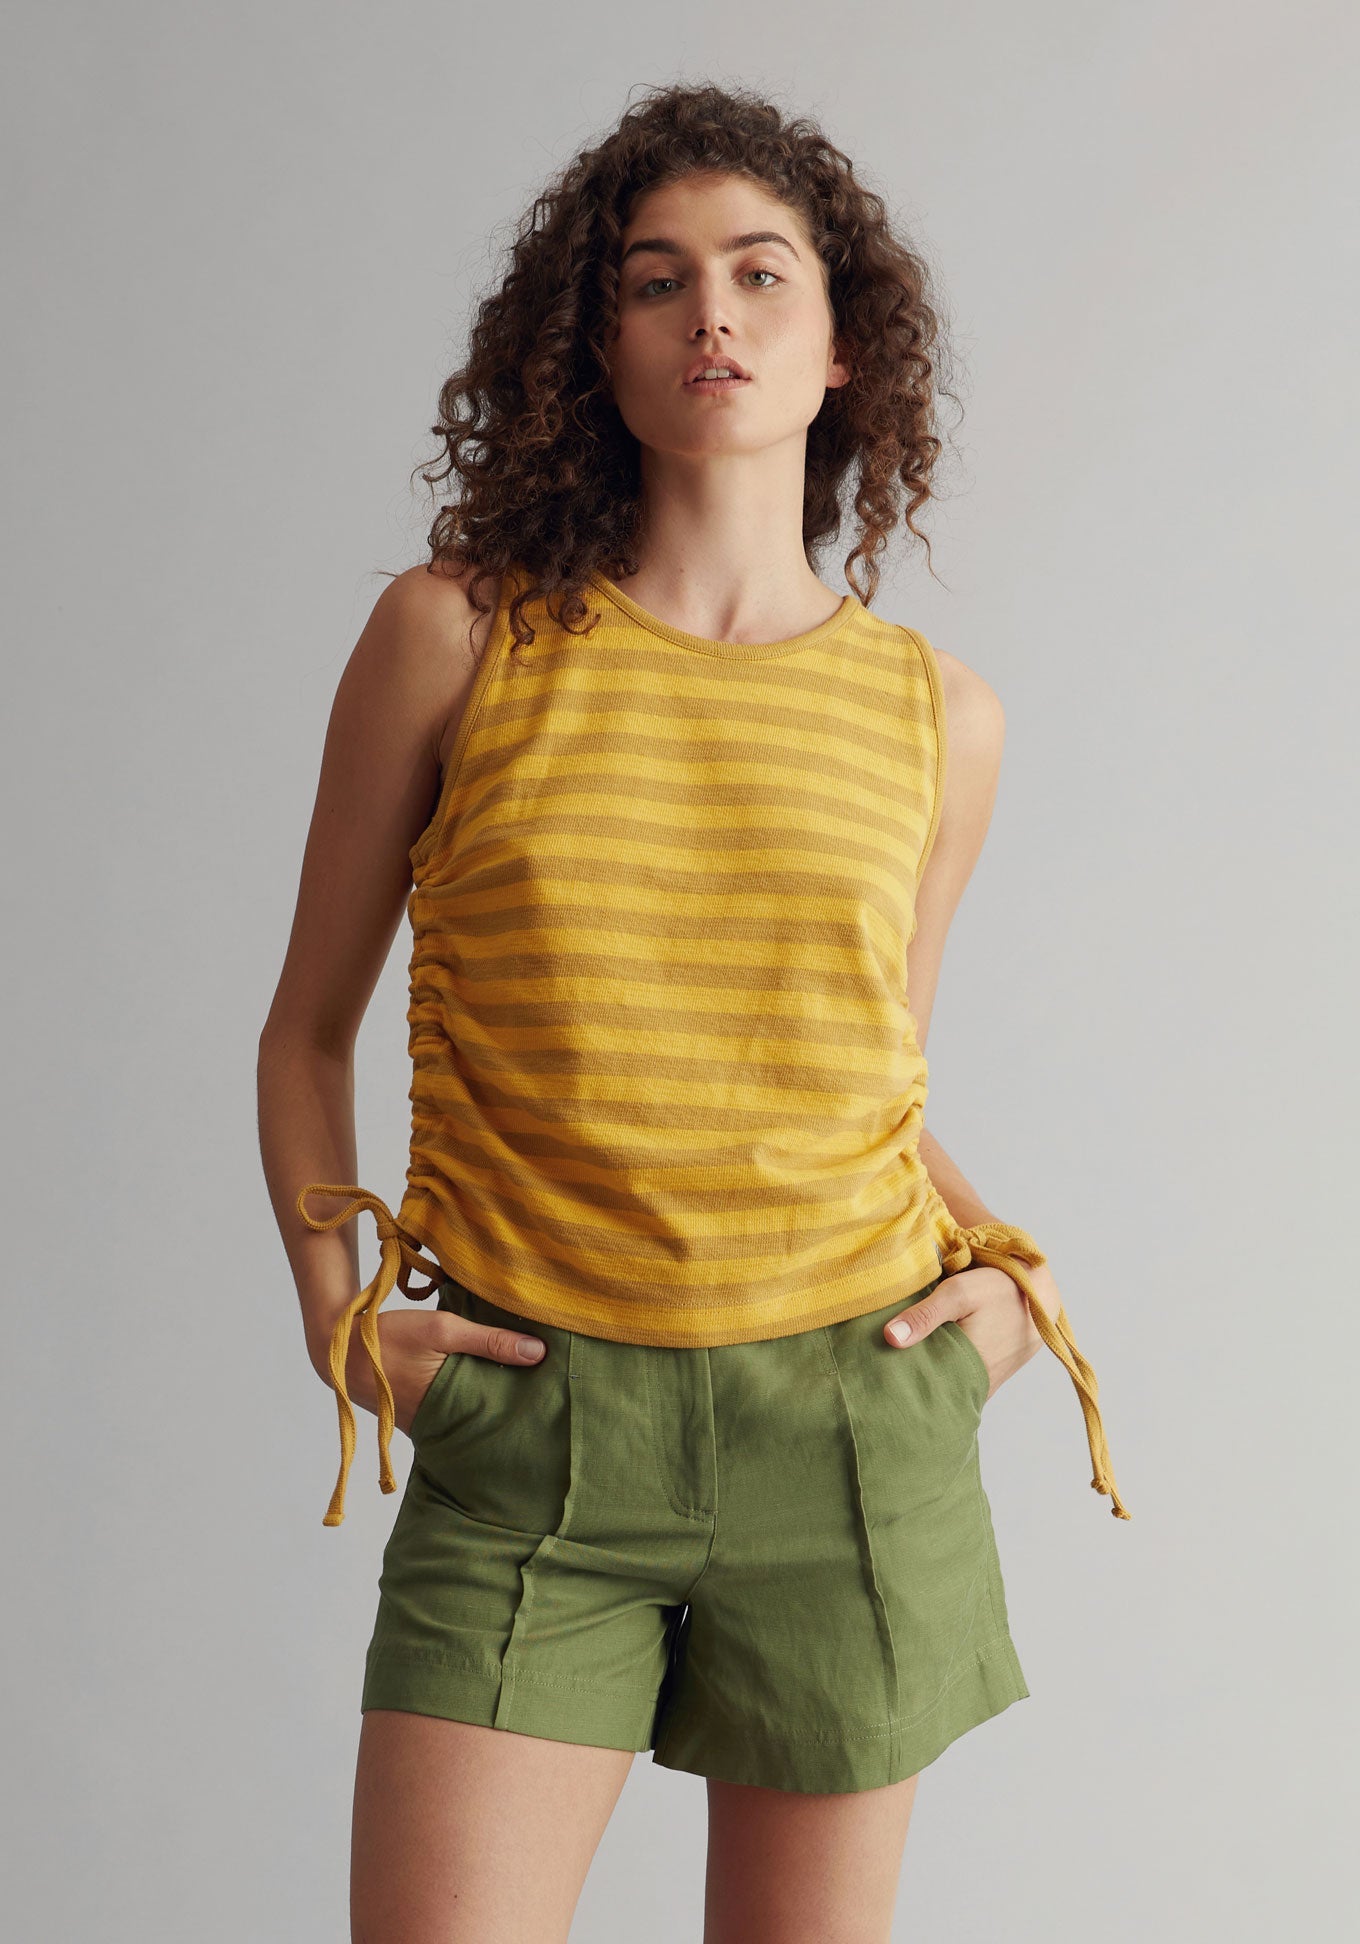 Yellow, brown, striped short-sleeved top ROSALIE made of organic cotton by Komodo